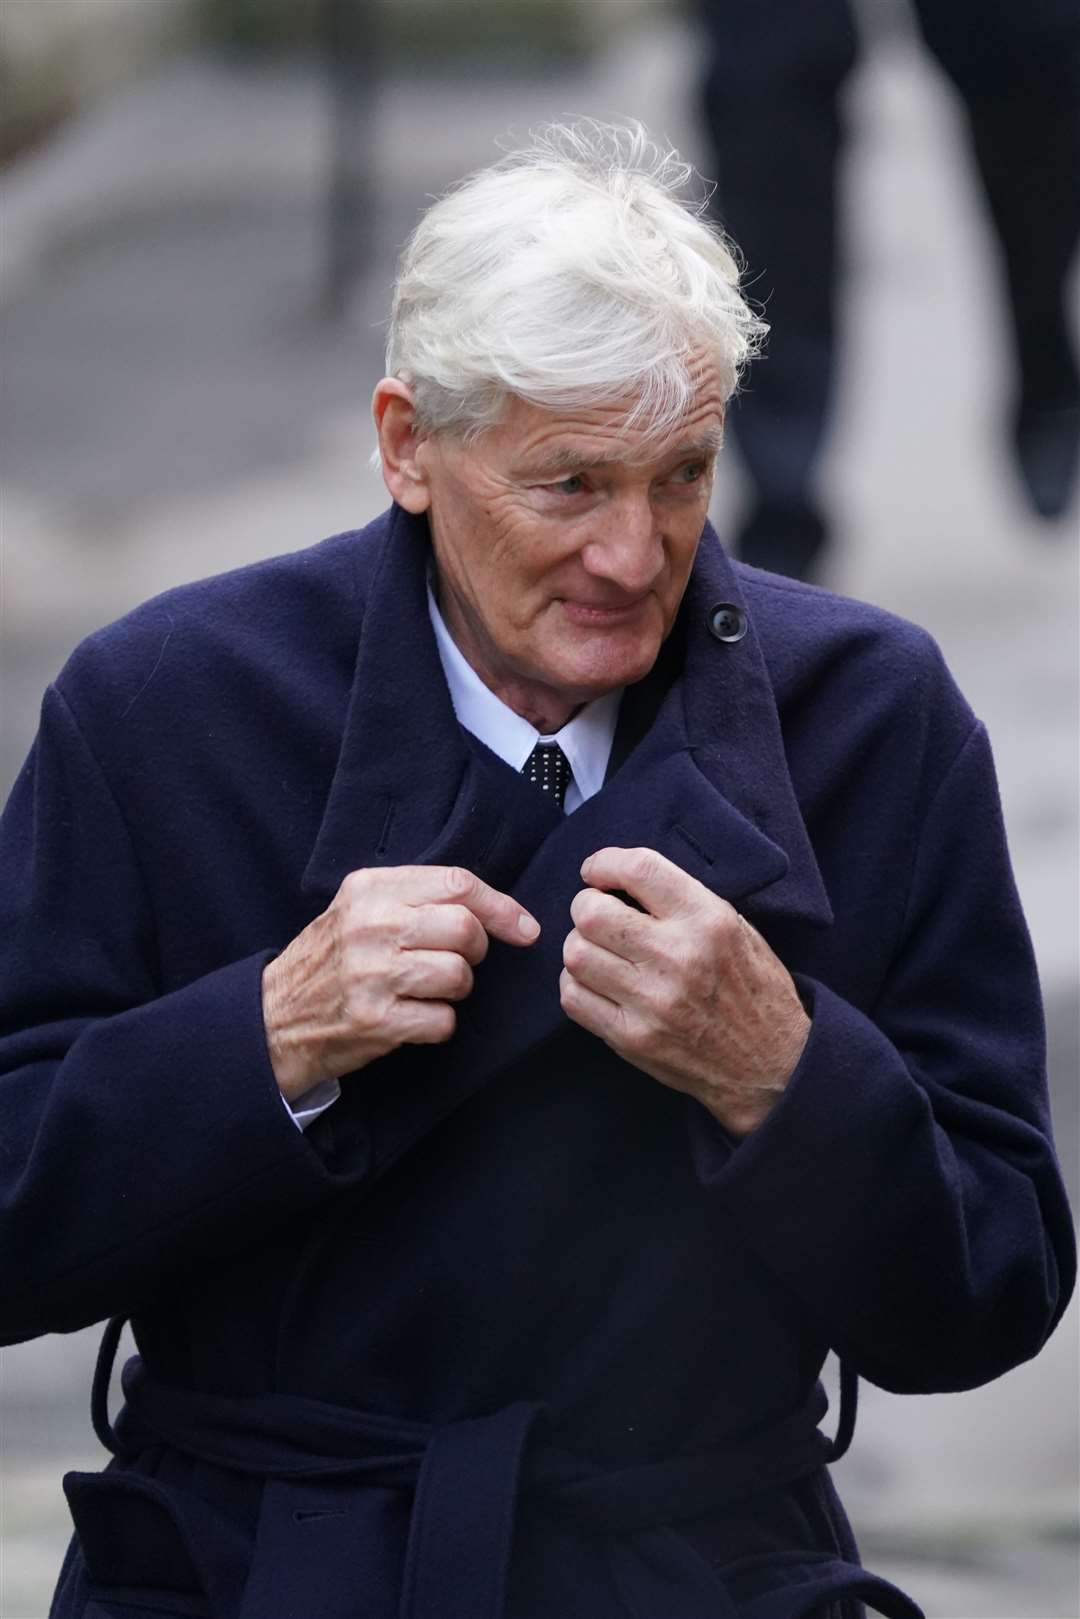 Sir James Dyson is suing the publishers of The Mirror for libel (Gareth Fuller/PA)